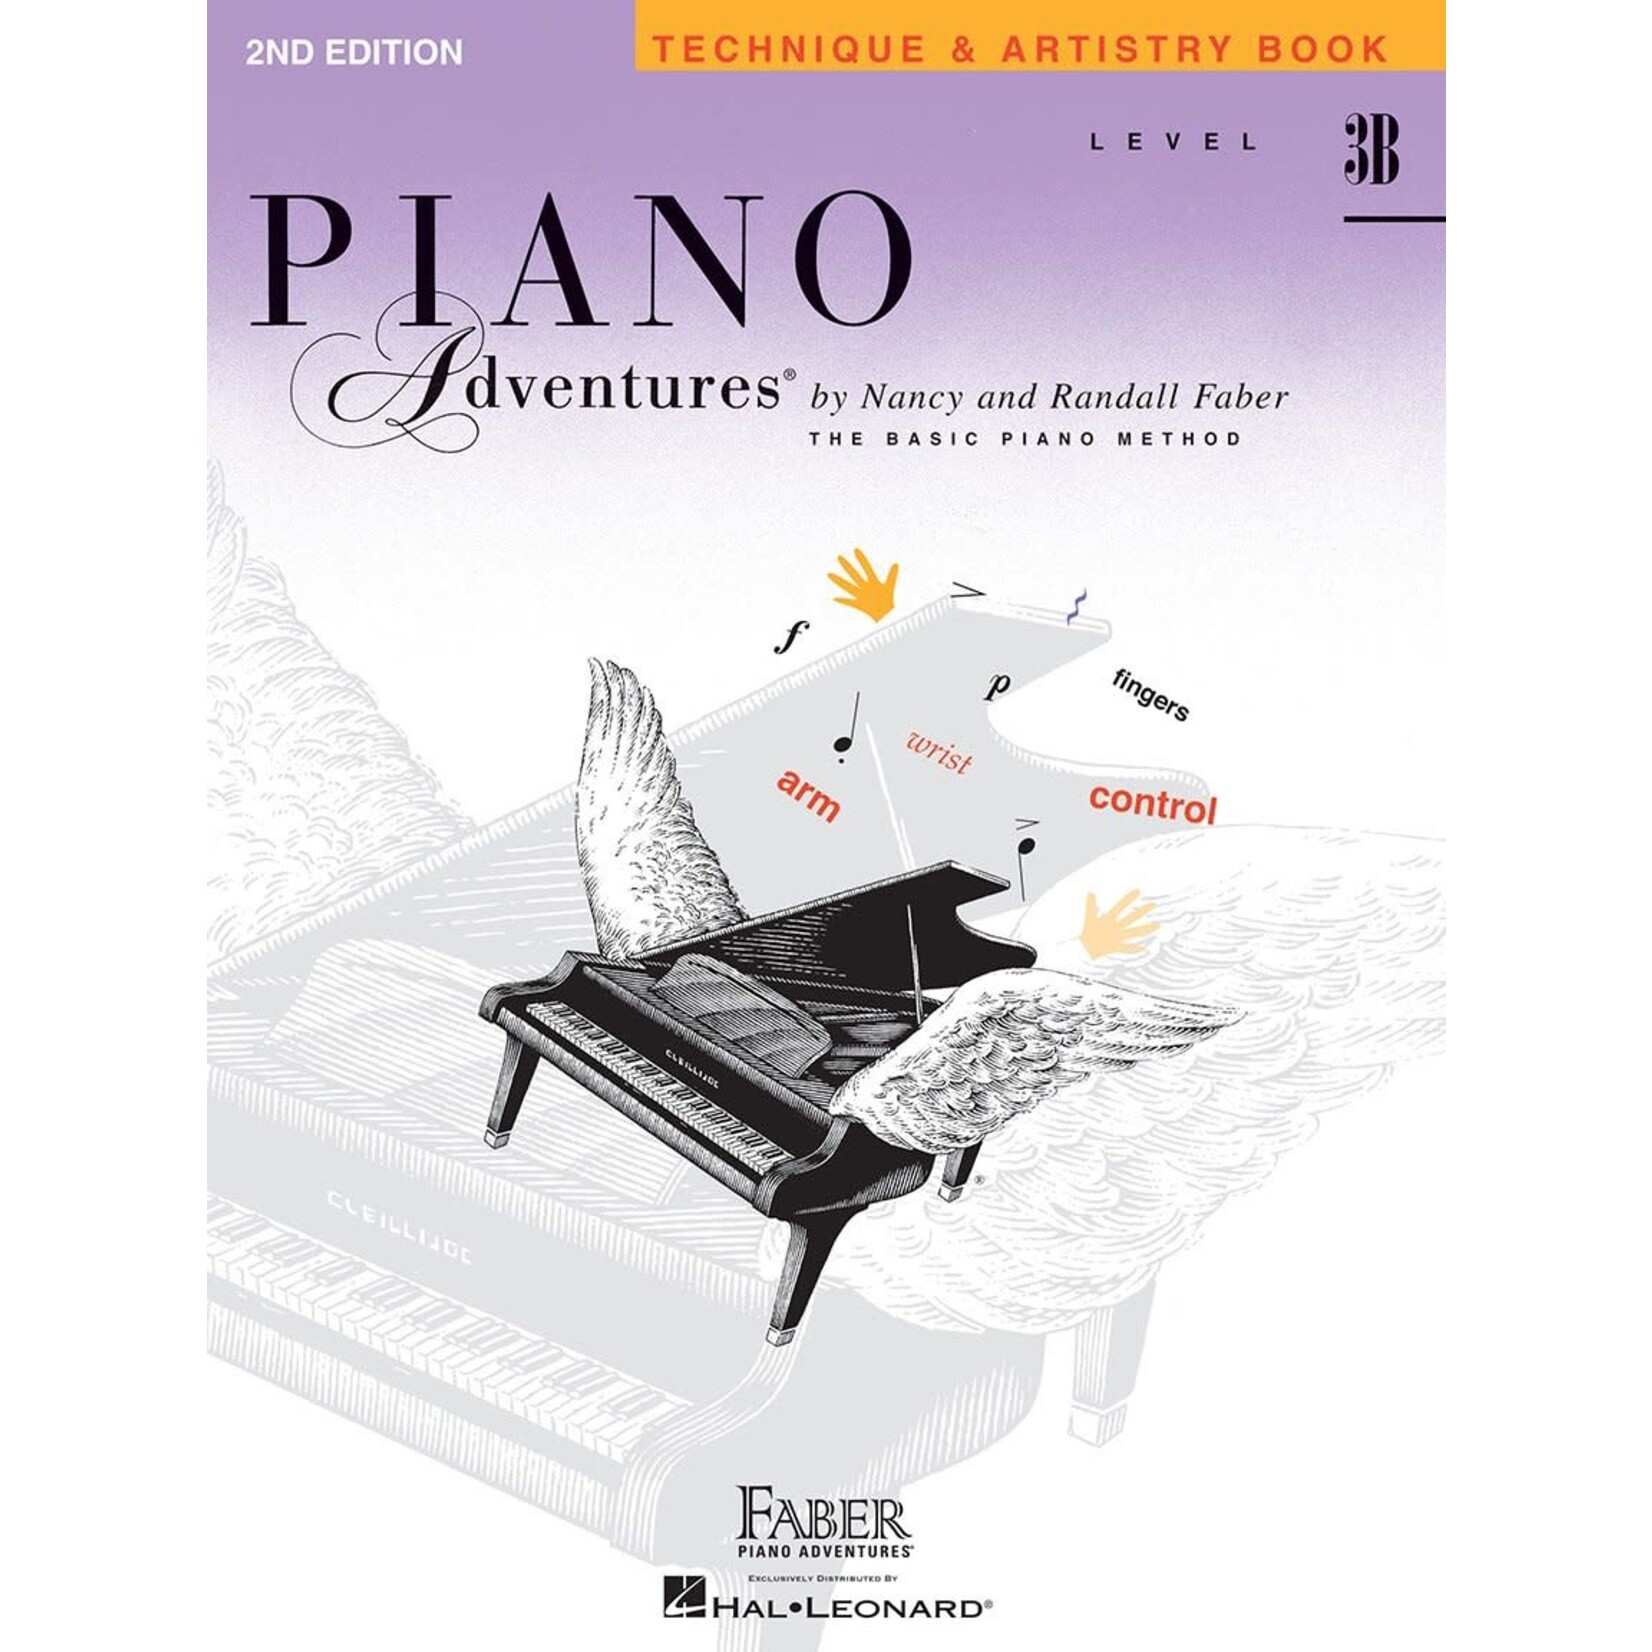 Faber Piano Adventures Level 3B - Technique & Artistry Book - Faber 2nd Edition